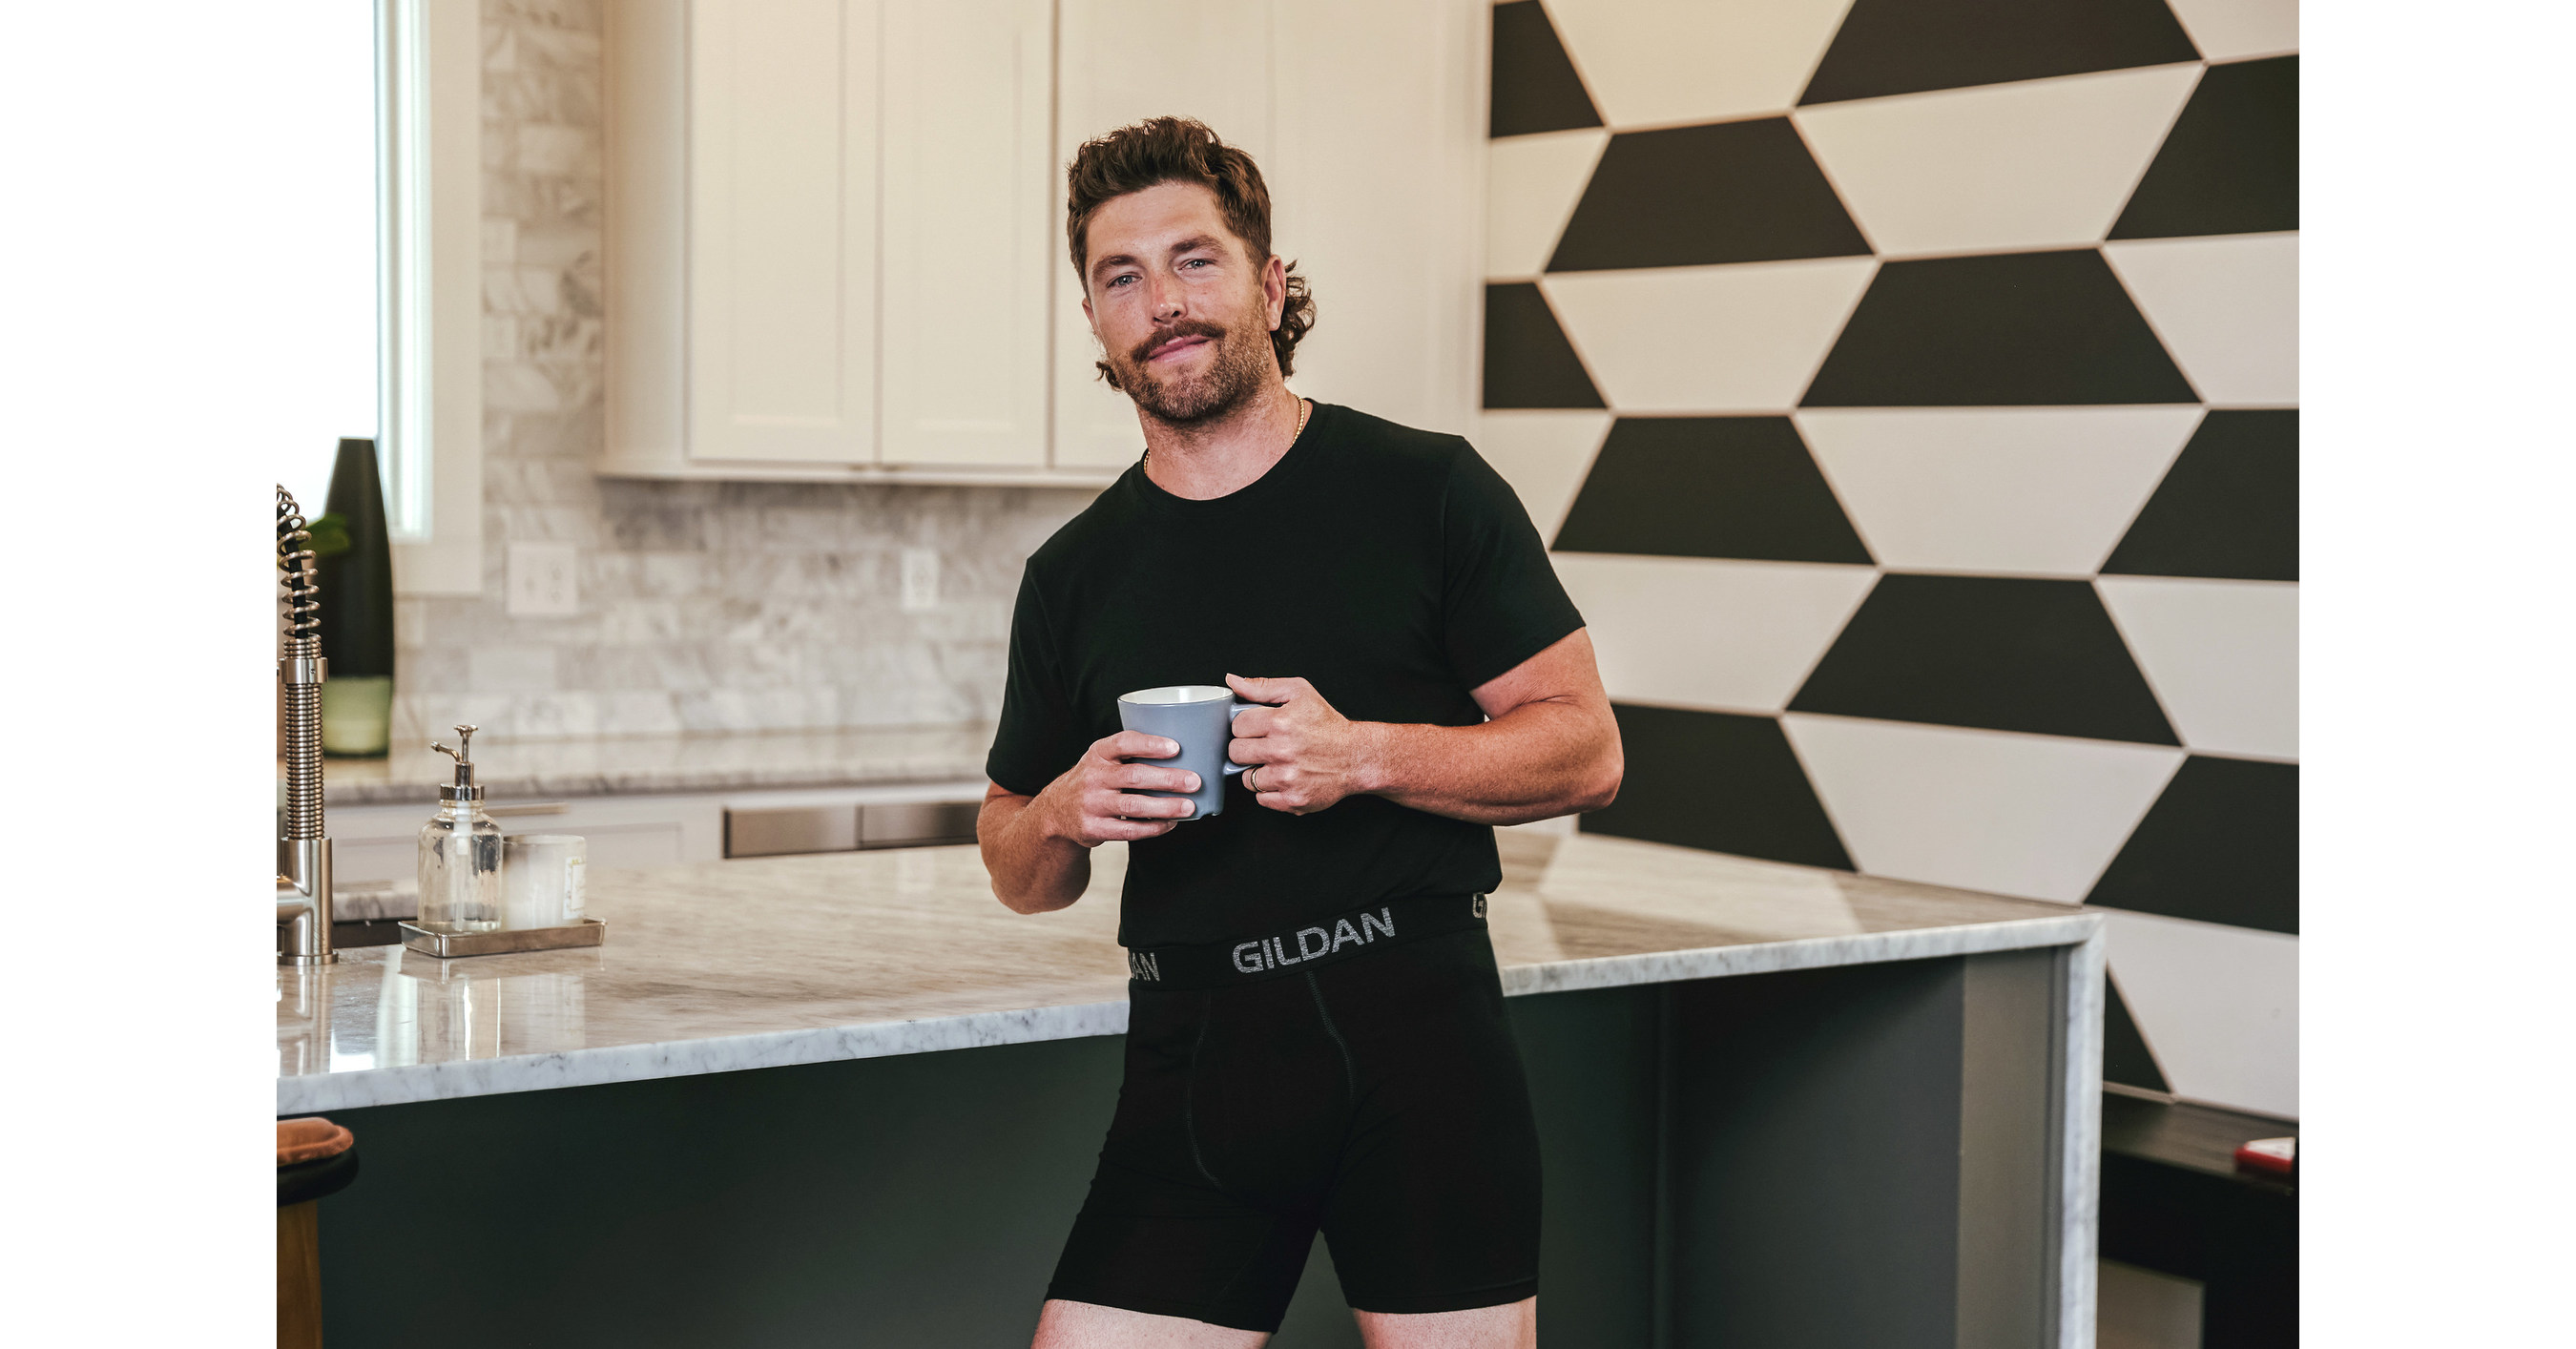 Gildan® Launches National Underwear Day Campaign in Partnership